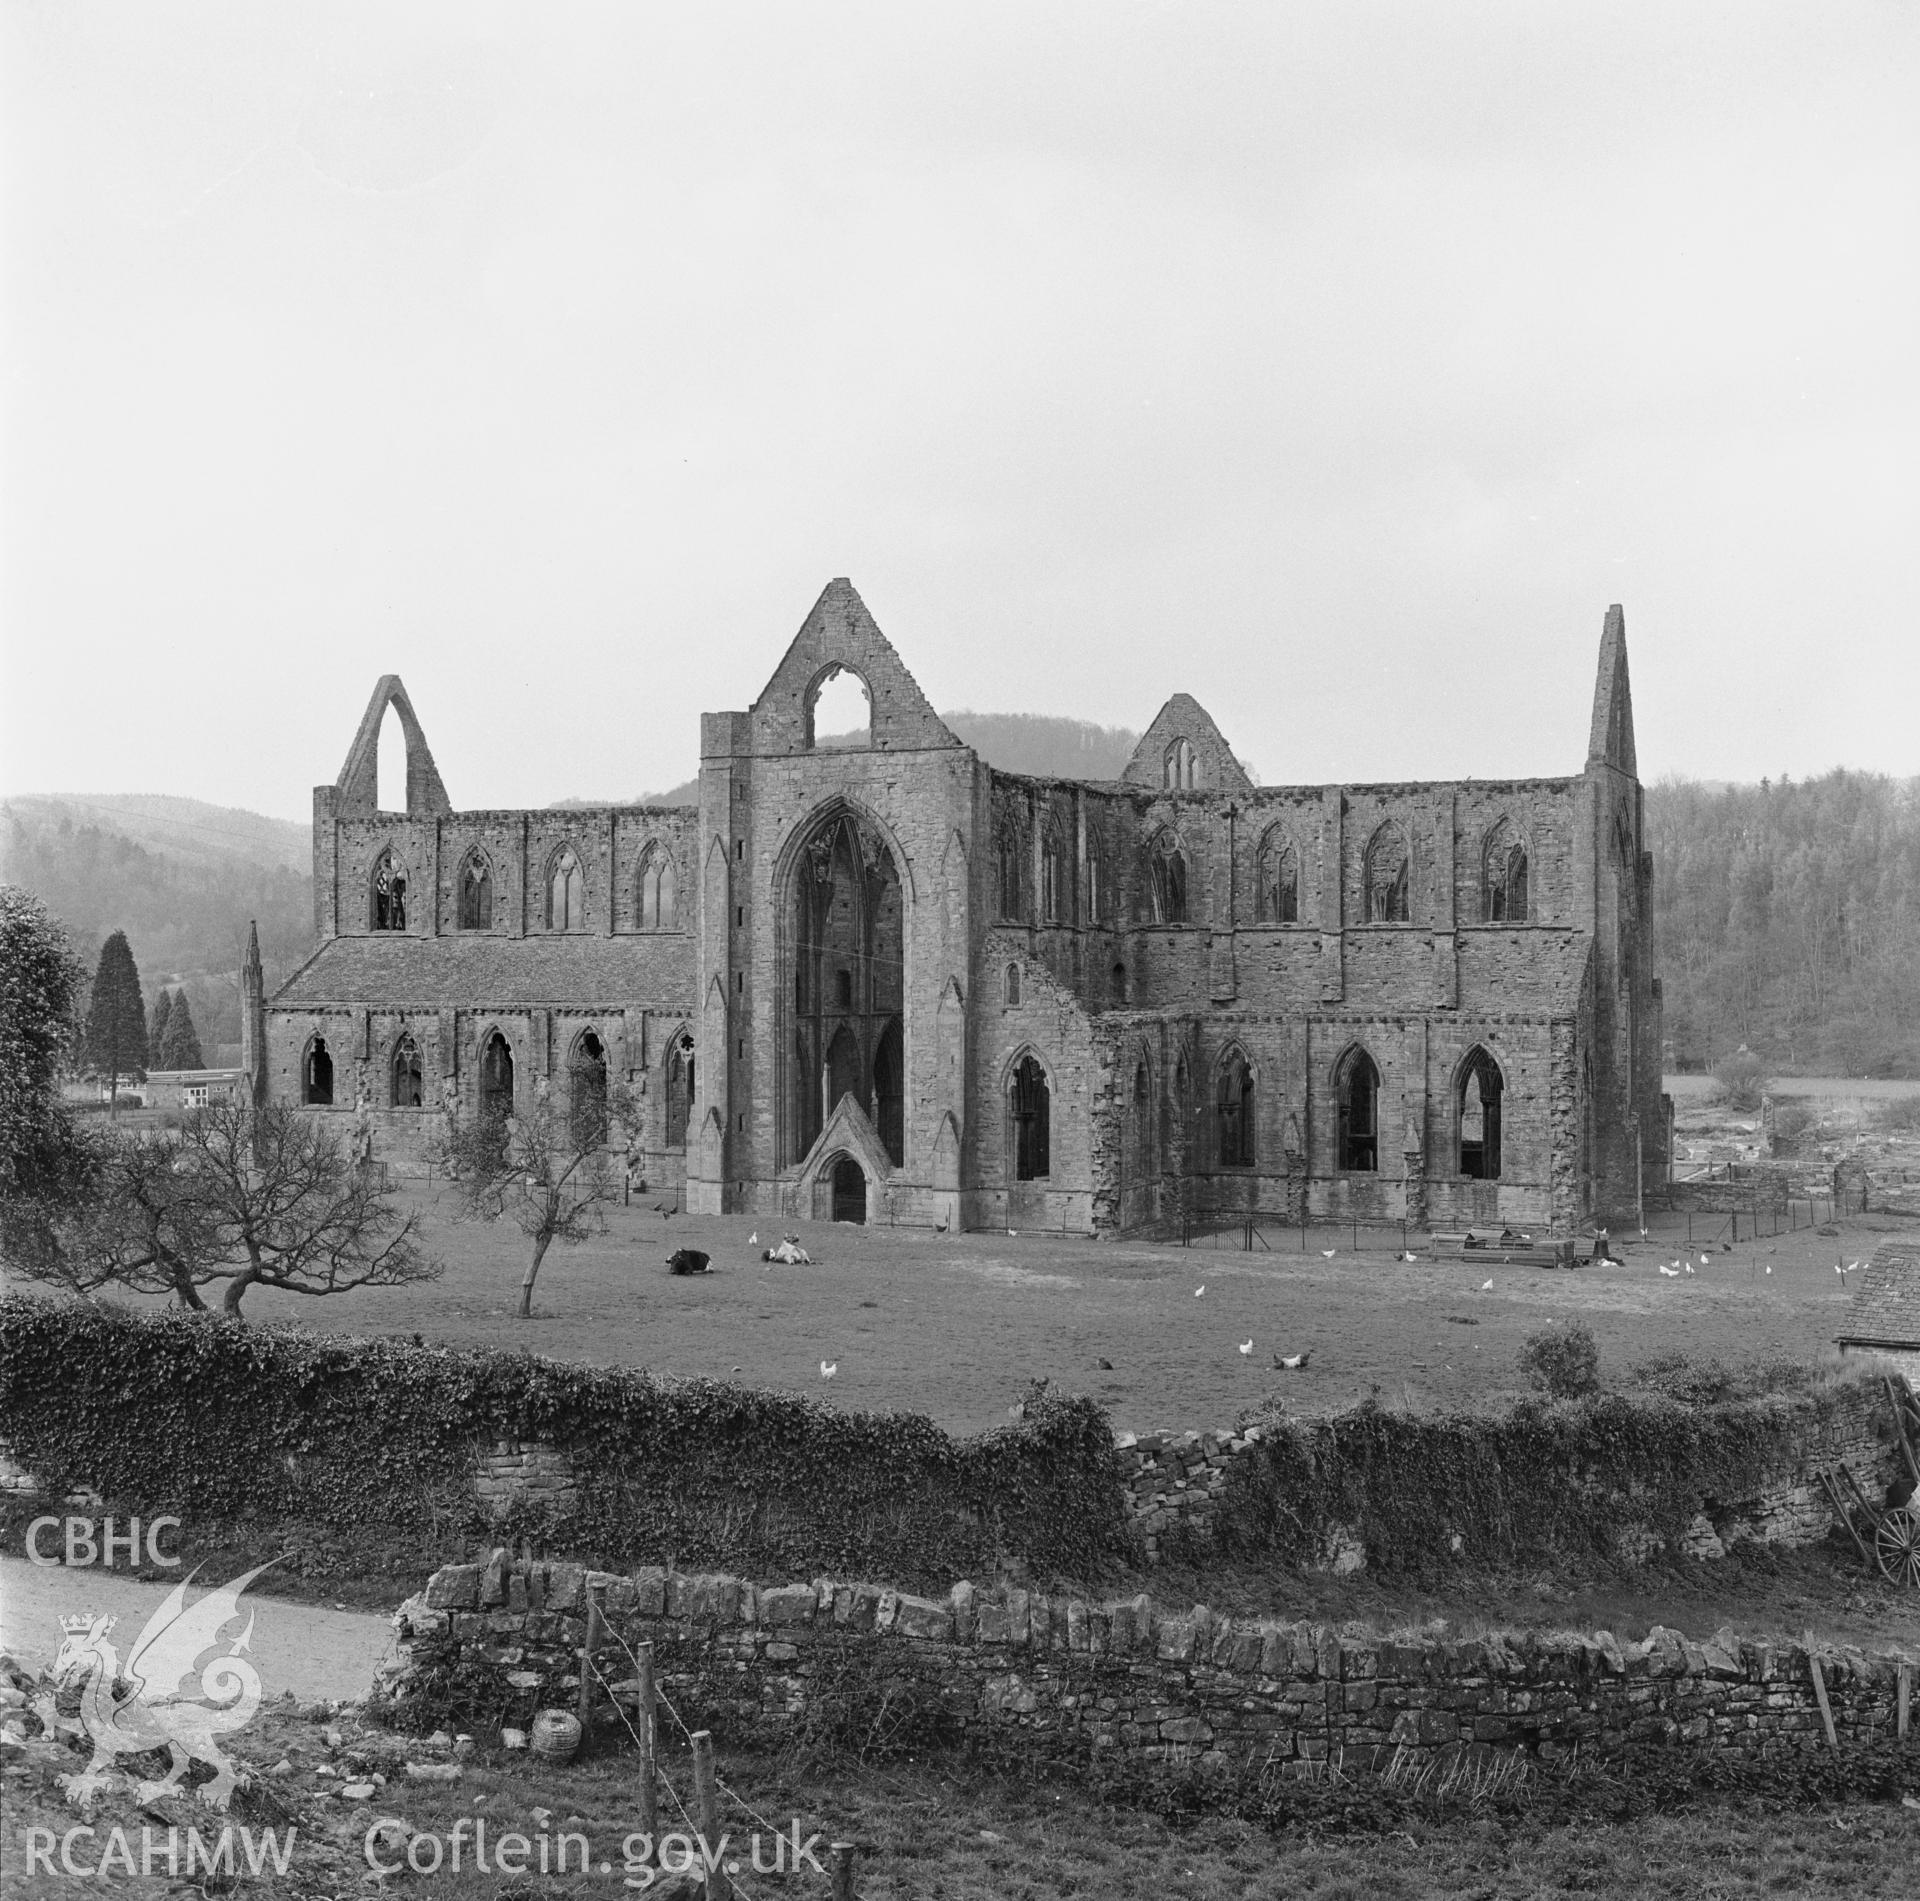 1 b/w print showing exterior view of Tintern Abbey; collated by the former Central Office of Information.